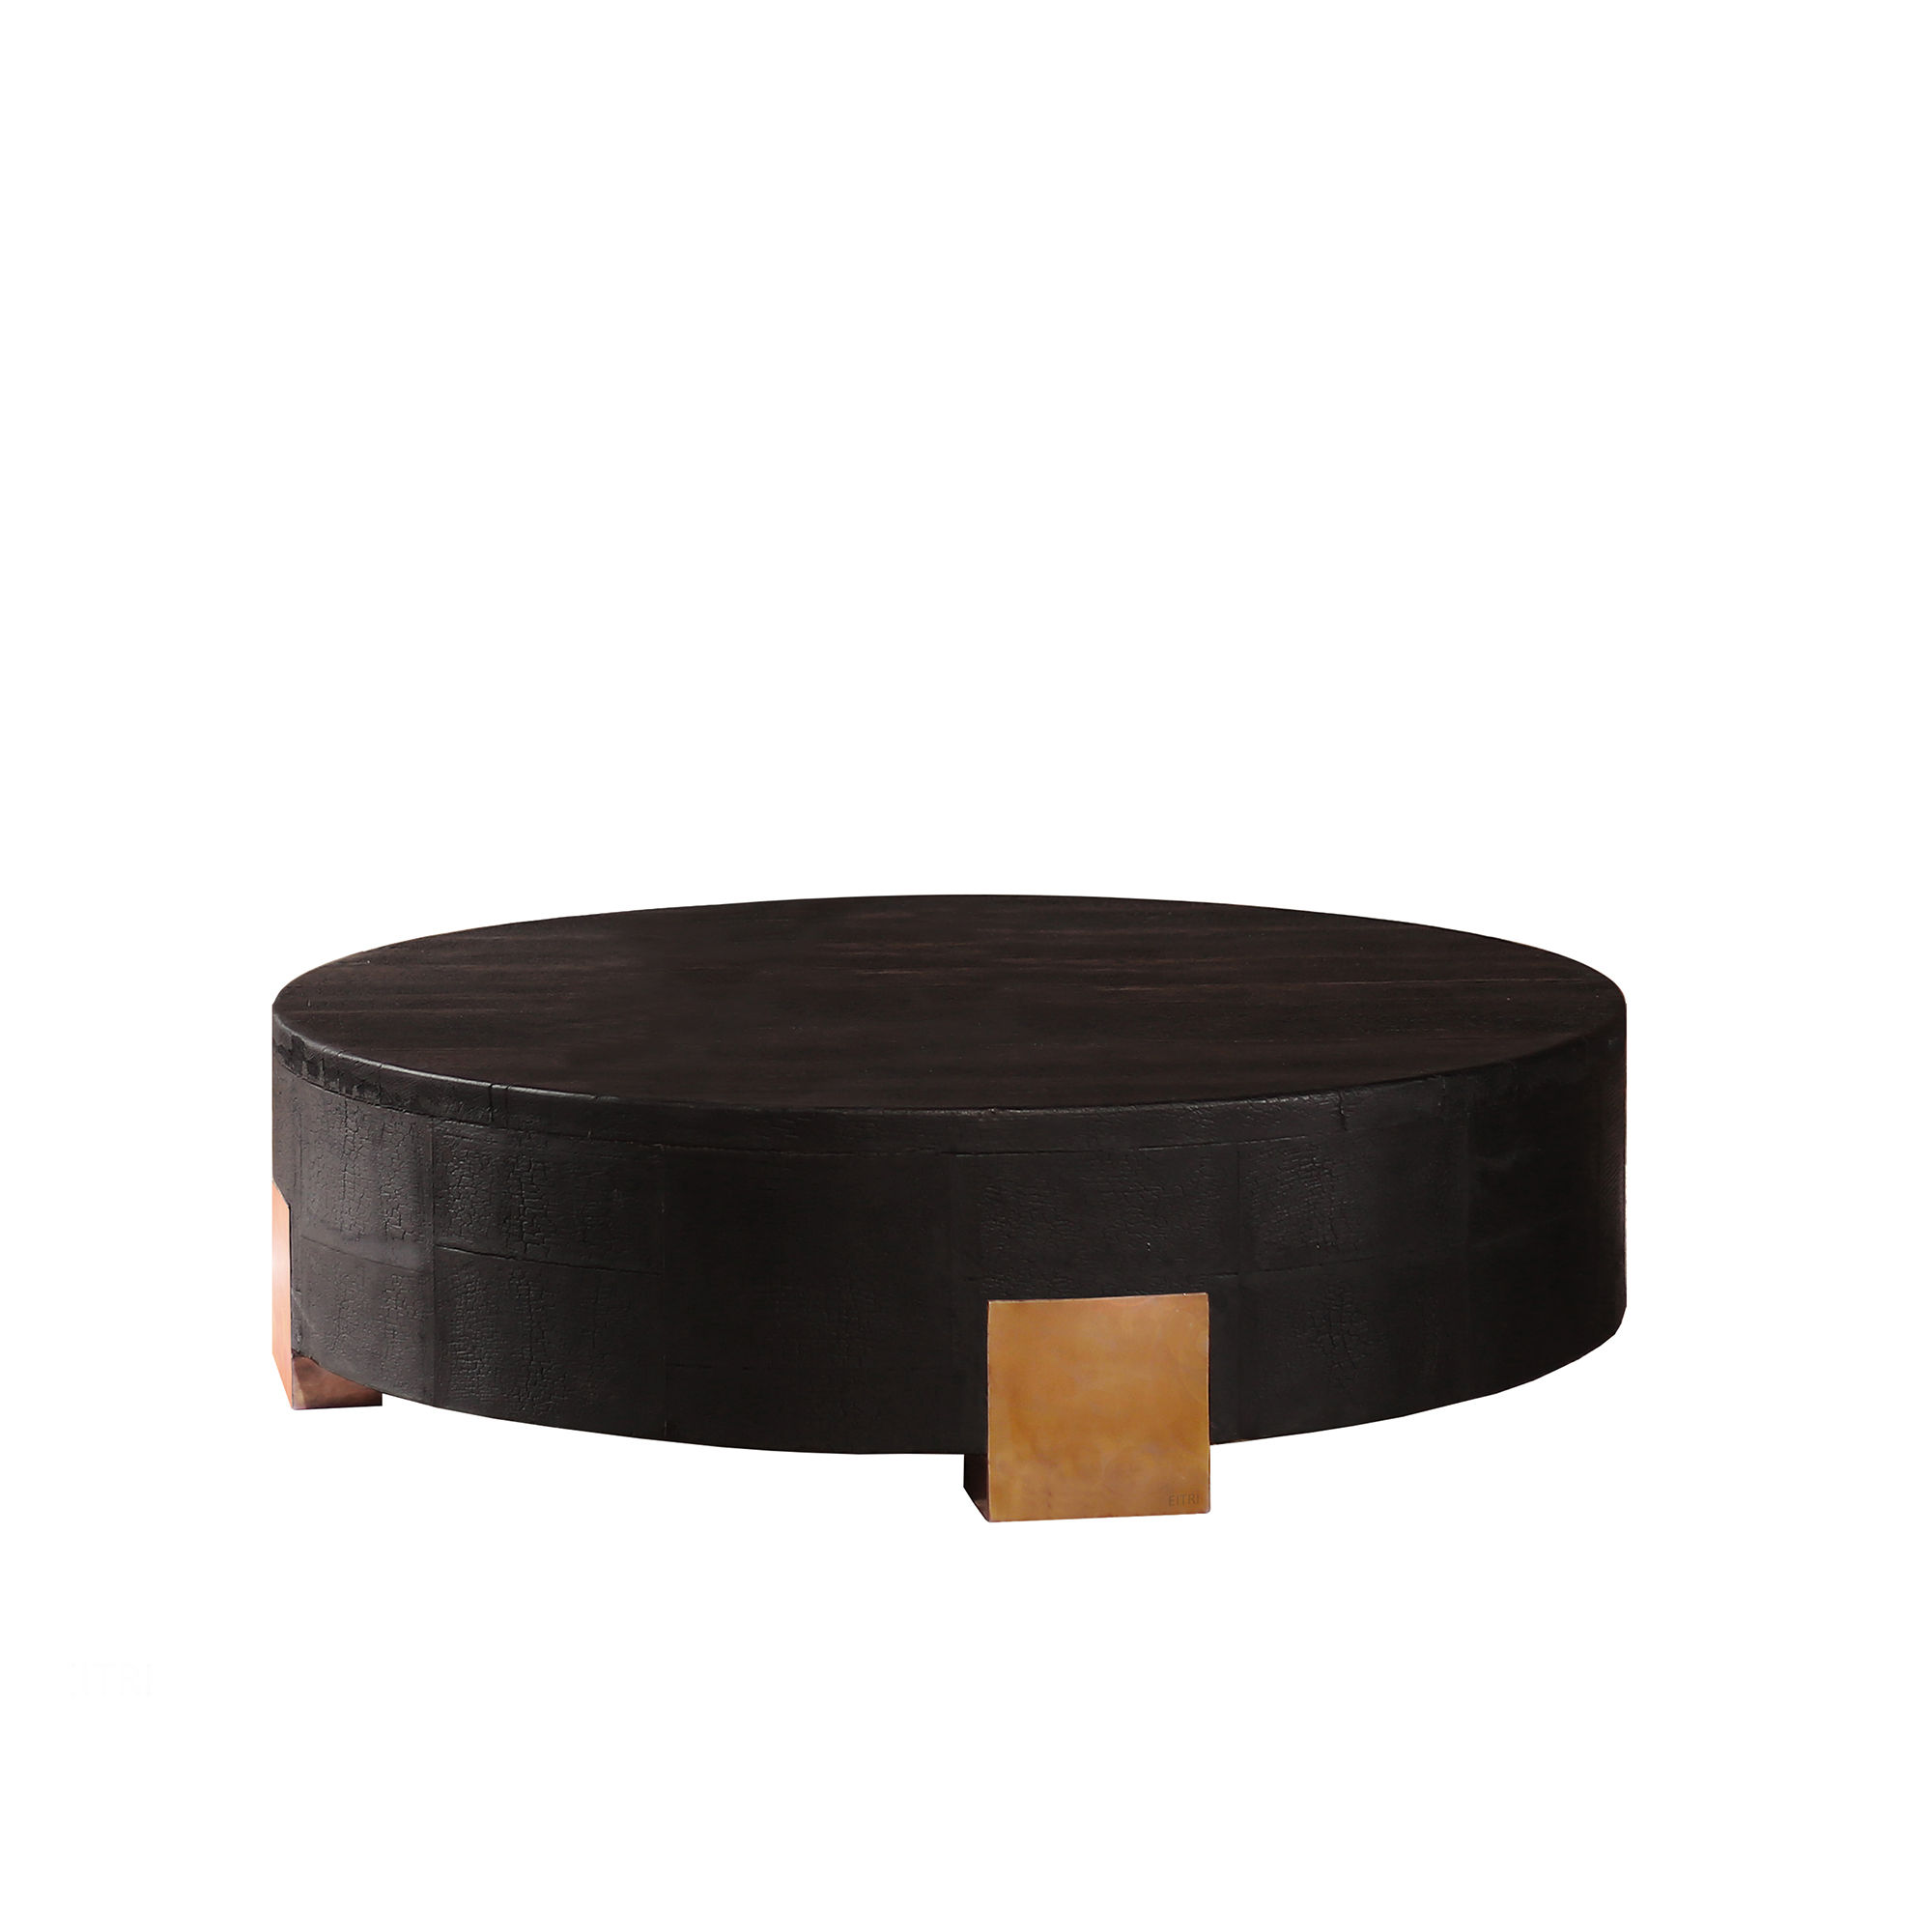 Carbon-12 Coffee Table Round